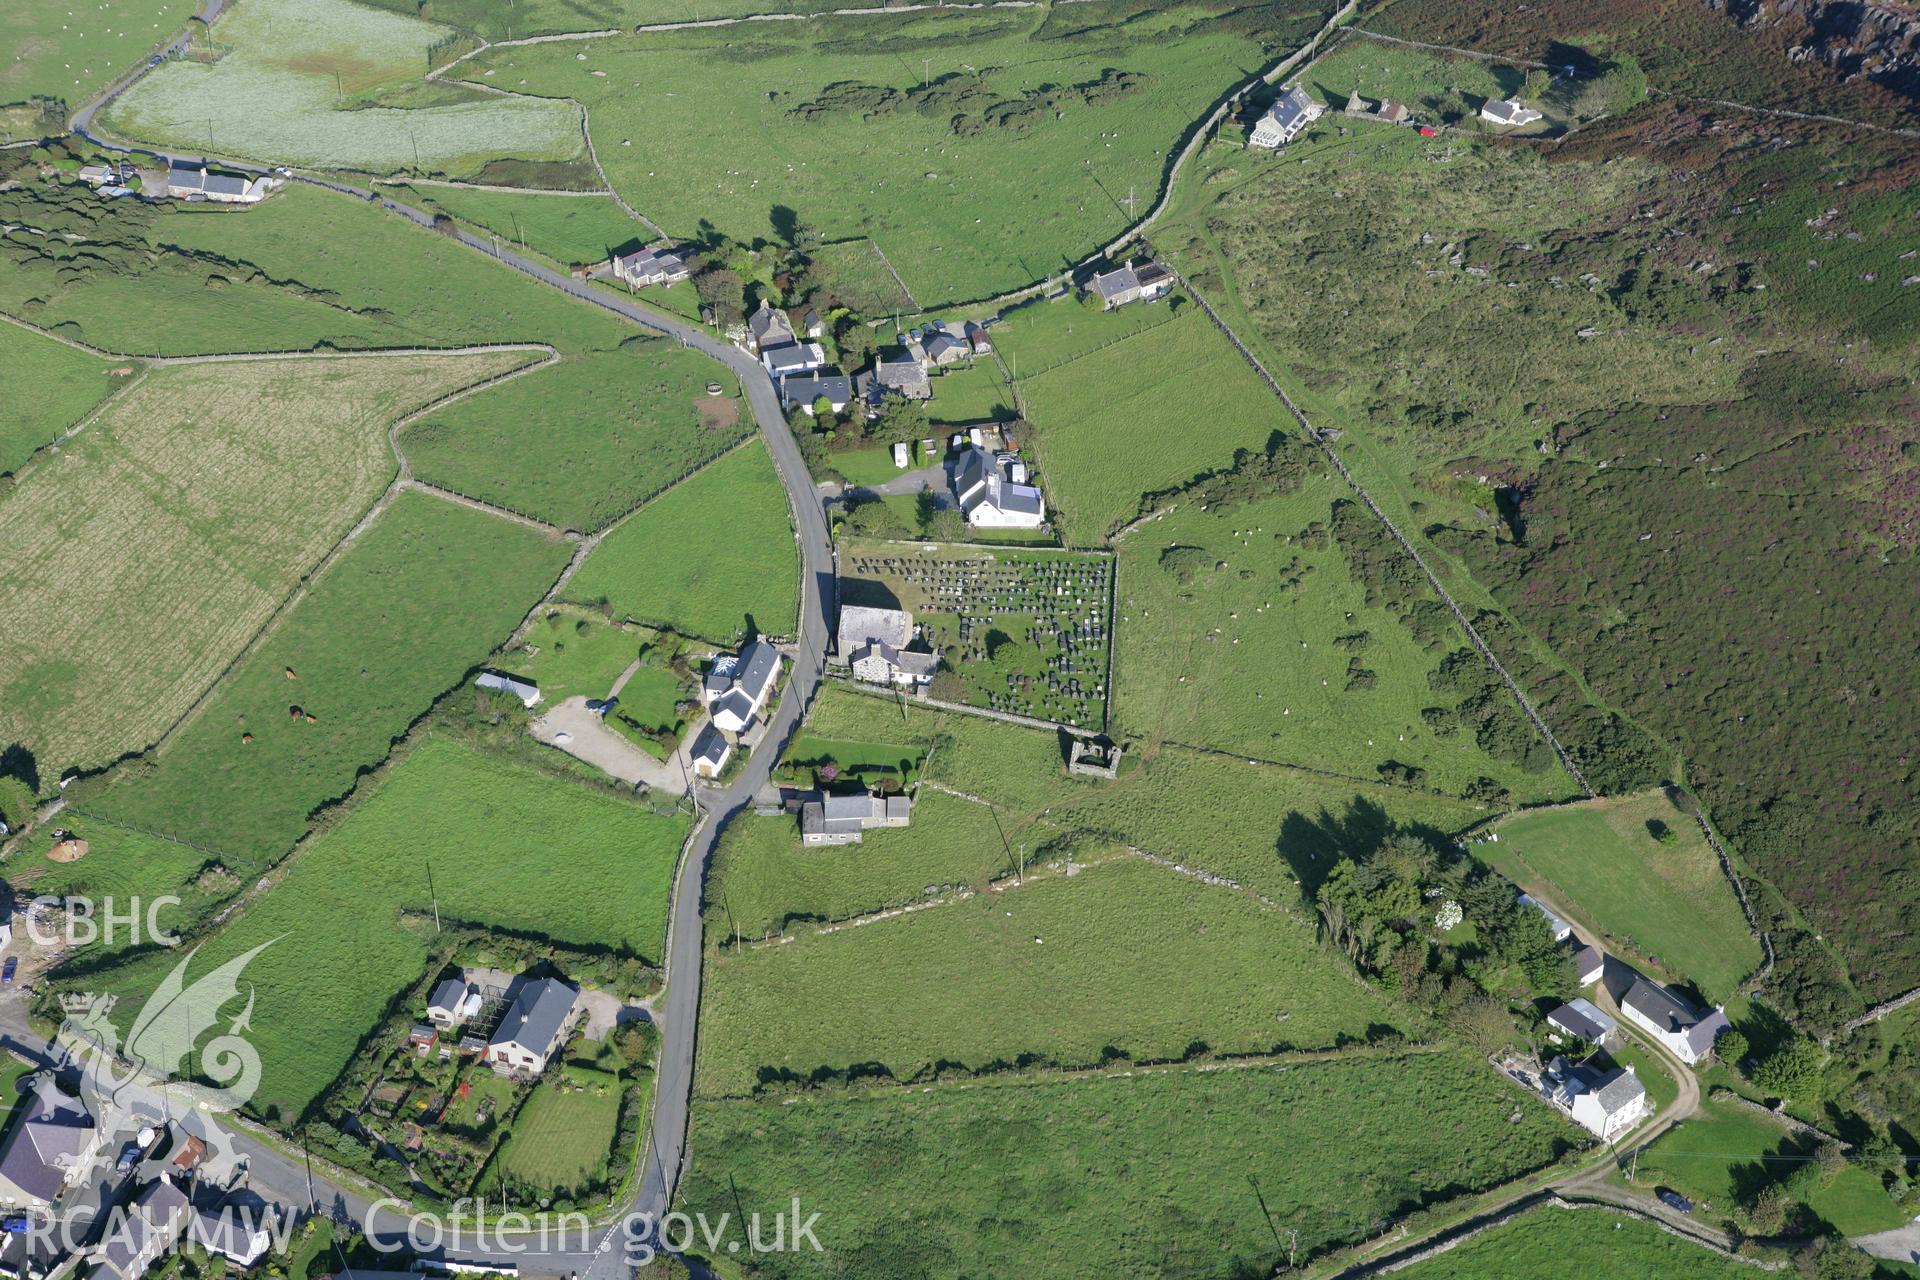 RCAHMW colour oblique aerial photograph of Nebo Independent Chapel, Y Rhiw hamlet, viewed looking east. Taken on 06 September 2007 by Toby Driver